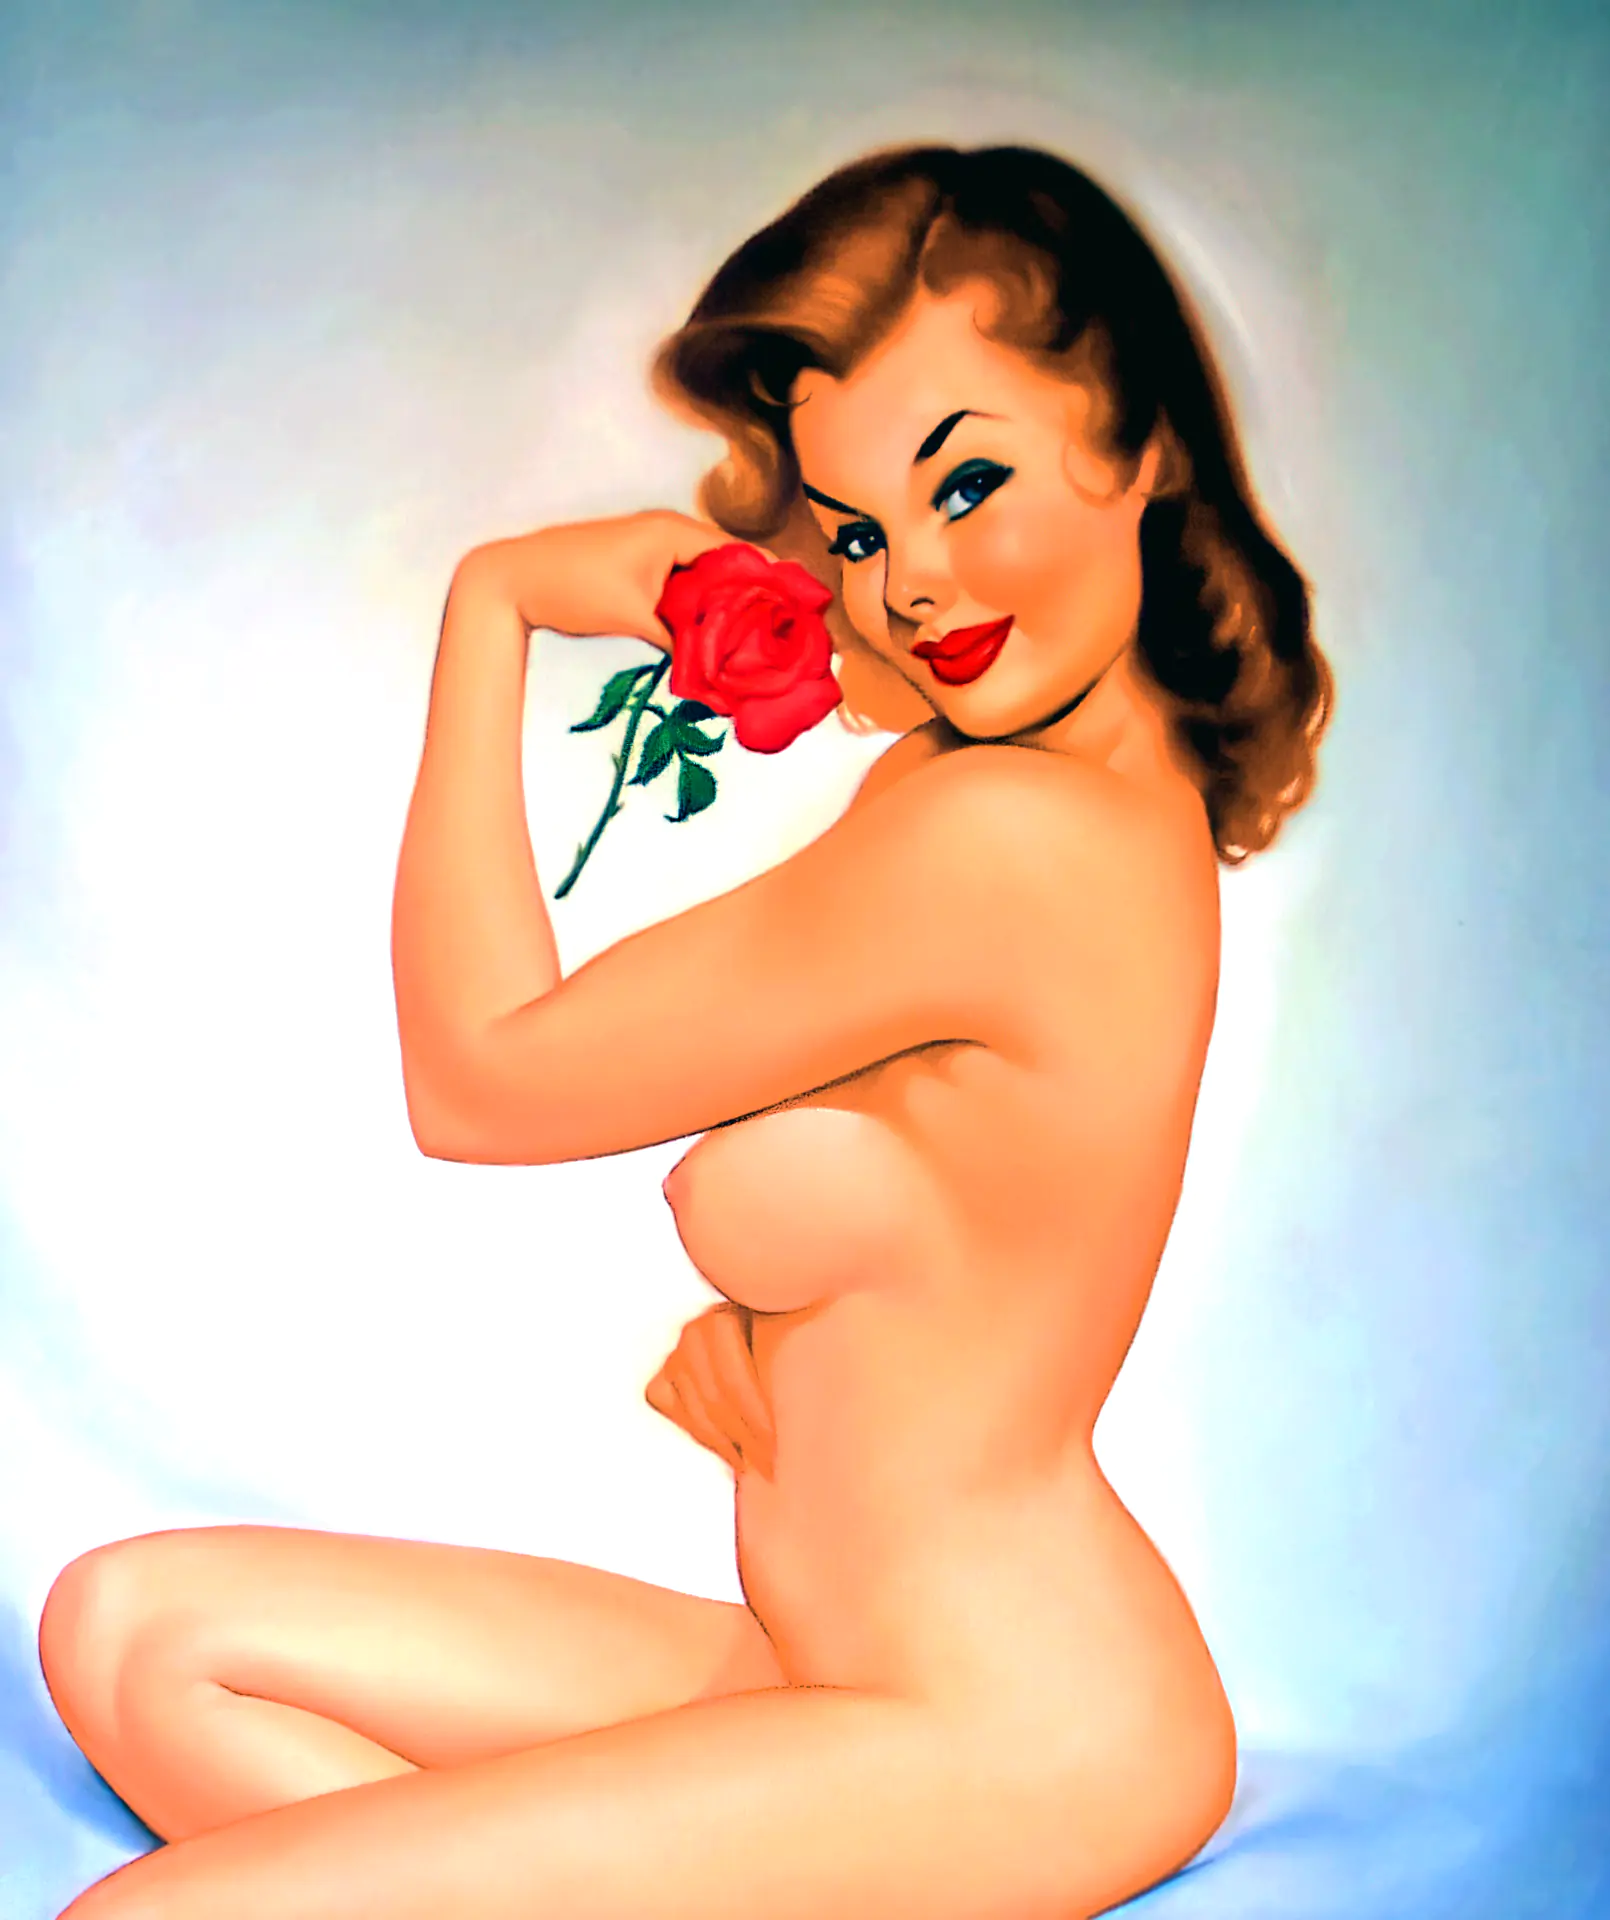 Vintage shower porn photo Red-haired pin-up classic babe with soft tits holds a rose